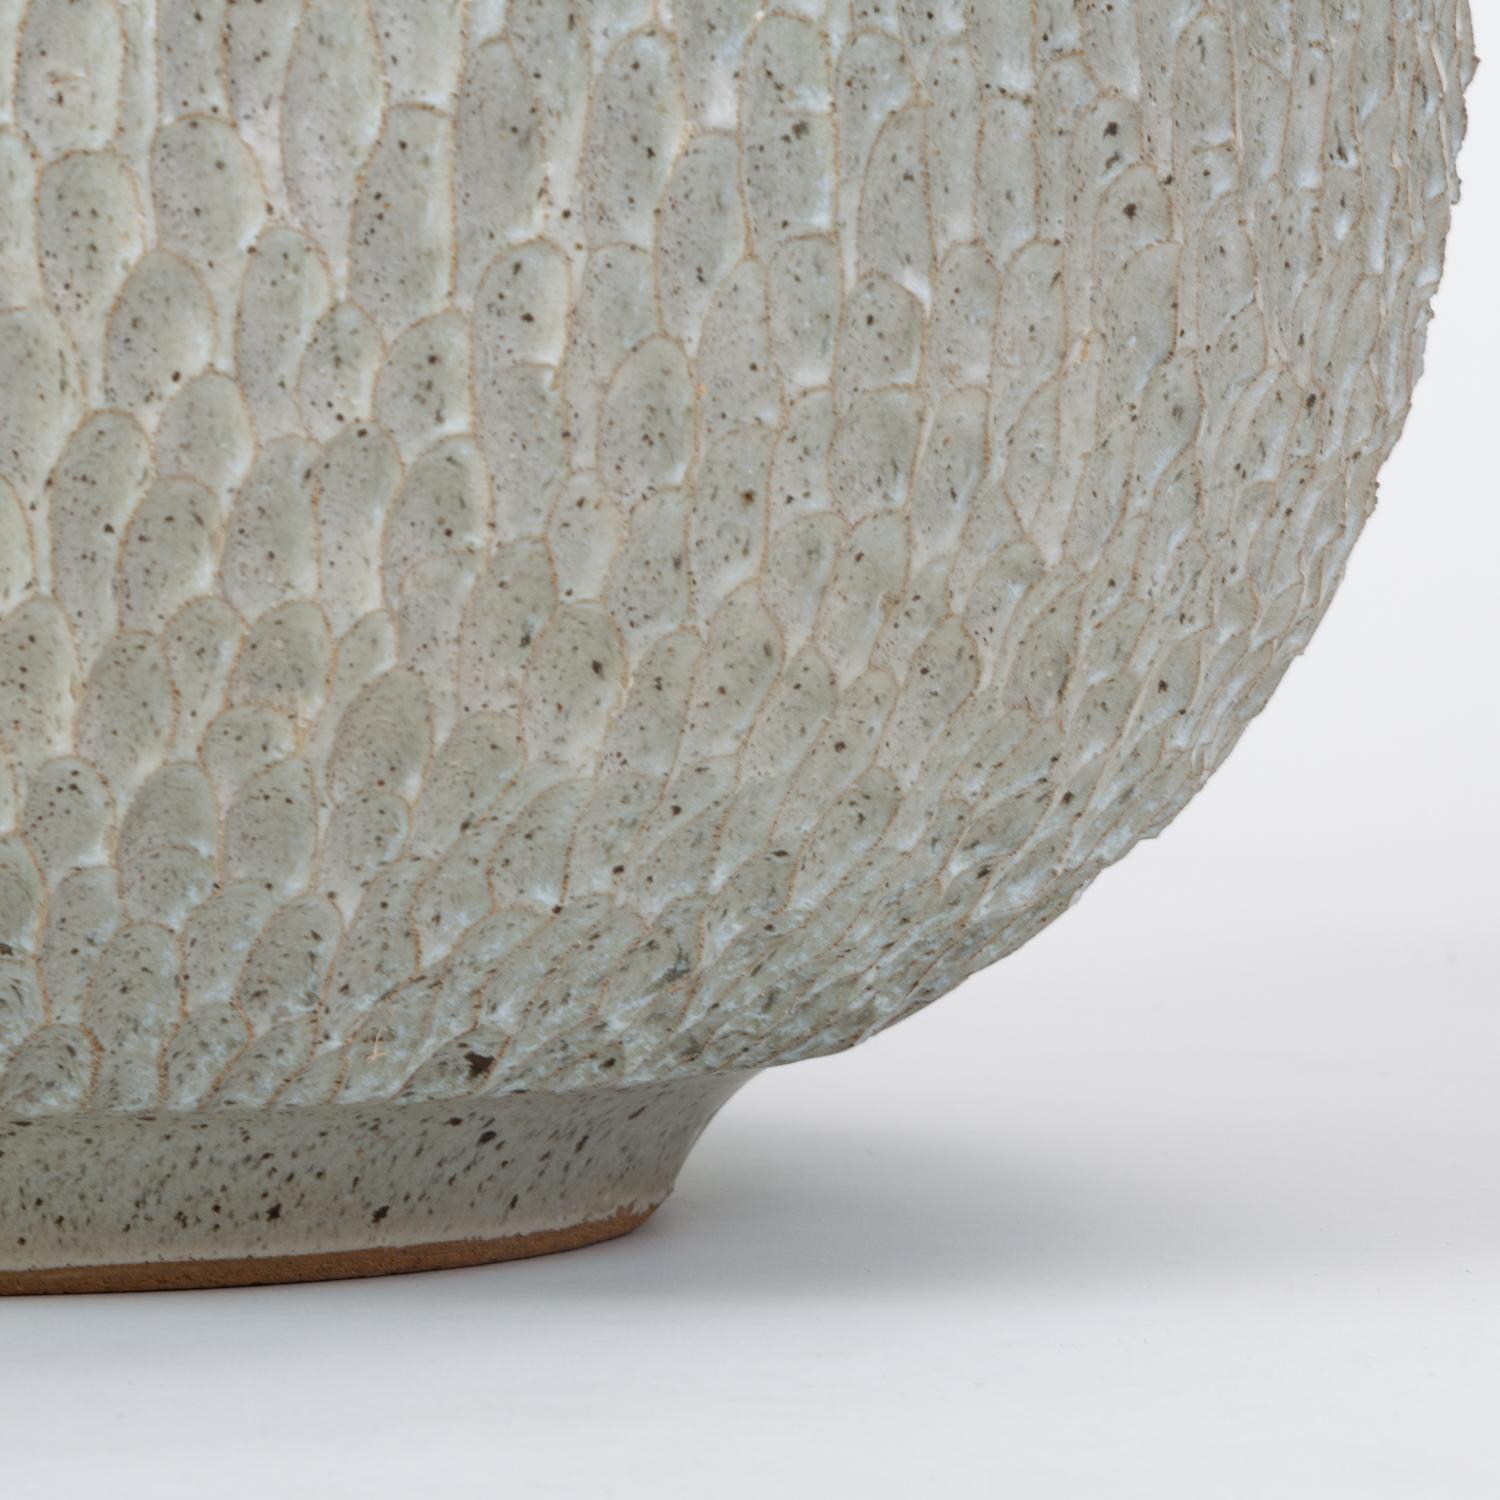 Stoneware Earthgender ‘Pebble’ Textured Bowl Planter by David Cressey and Robert Maxwell